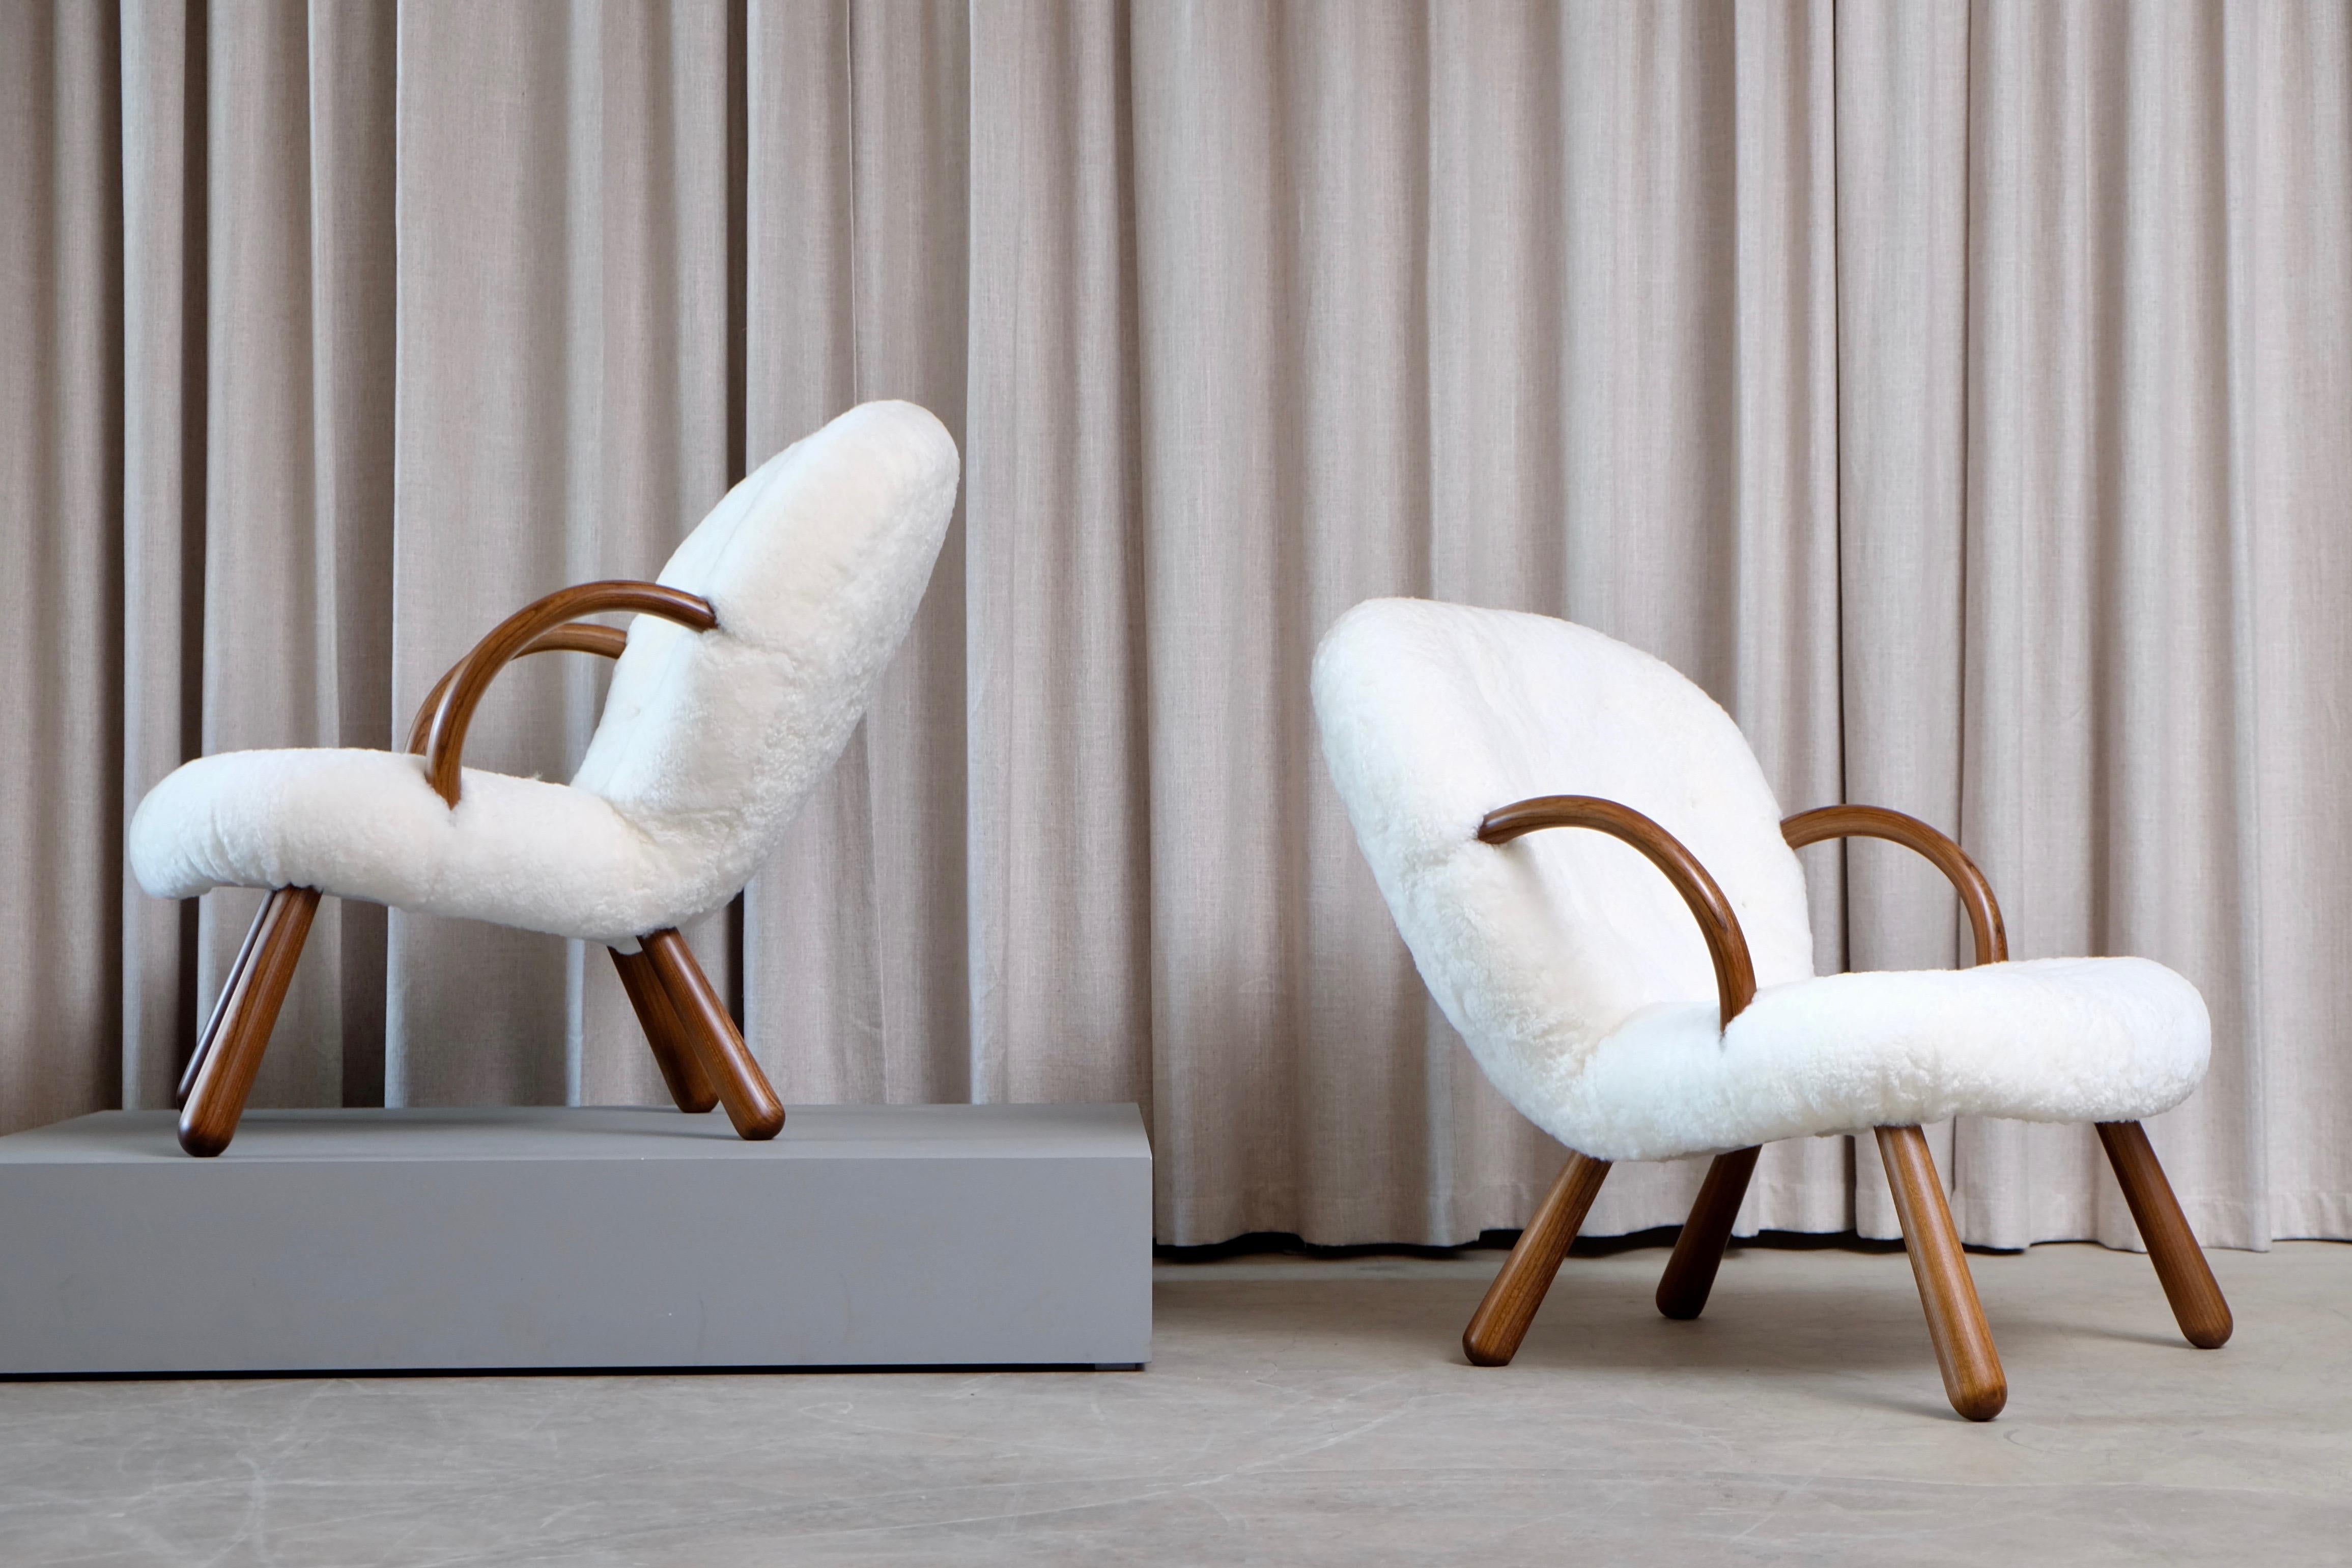 Scandinavian Modern Philip Arctander Clam Chairs by Nordisk Stål & Møbel Central in Denmark, 1940s